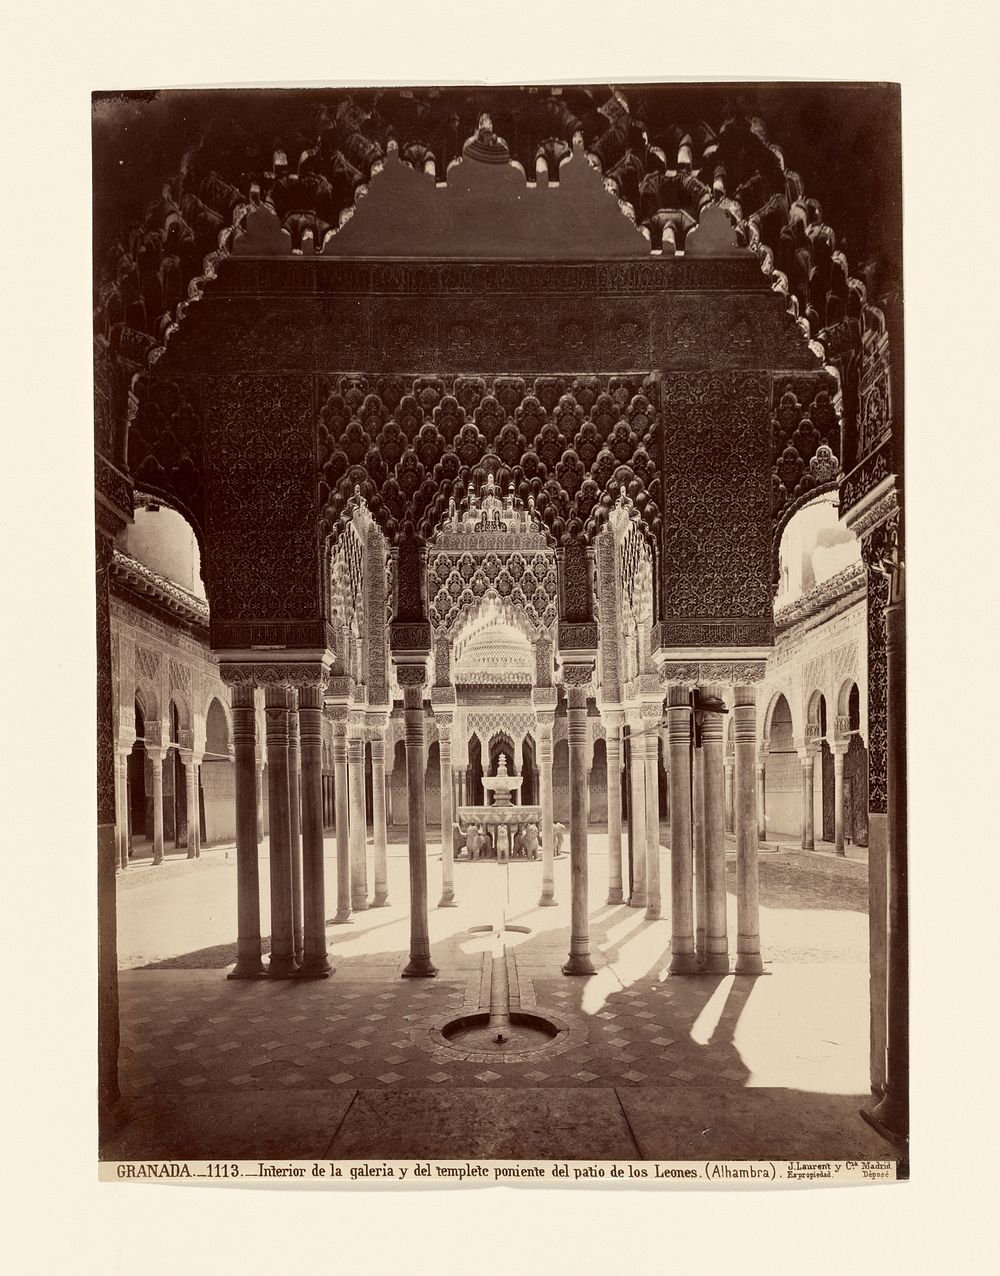 Interior of portico and western dome of the Court of the Lions, Alhambra. by Juan Laurent